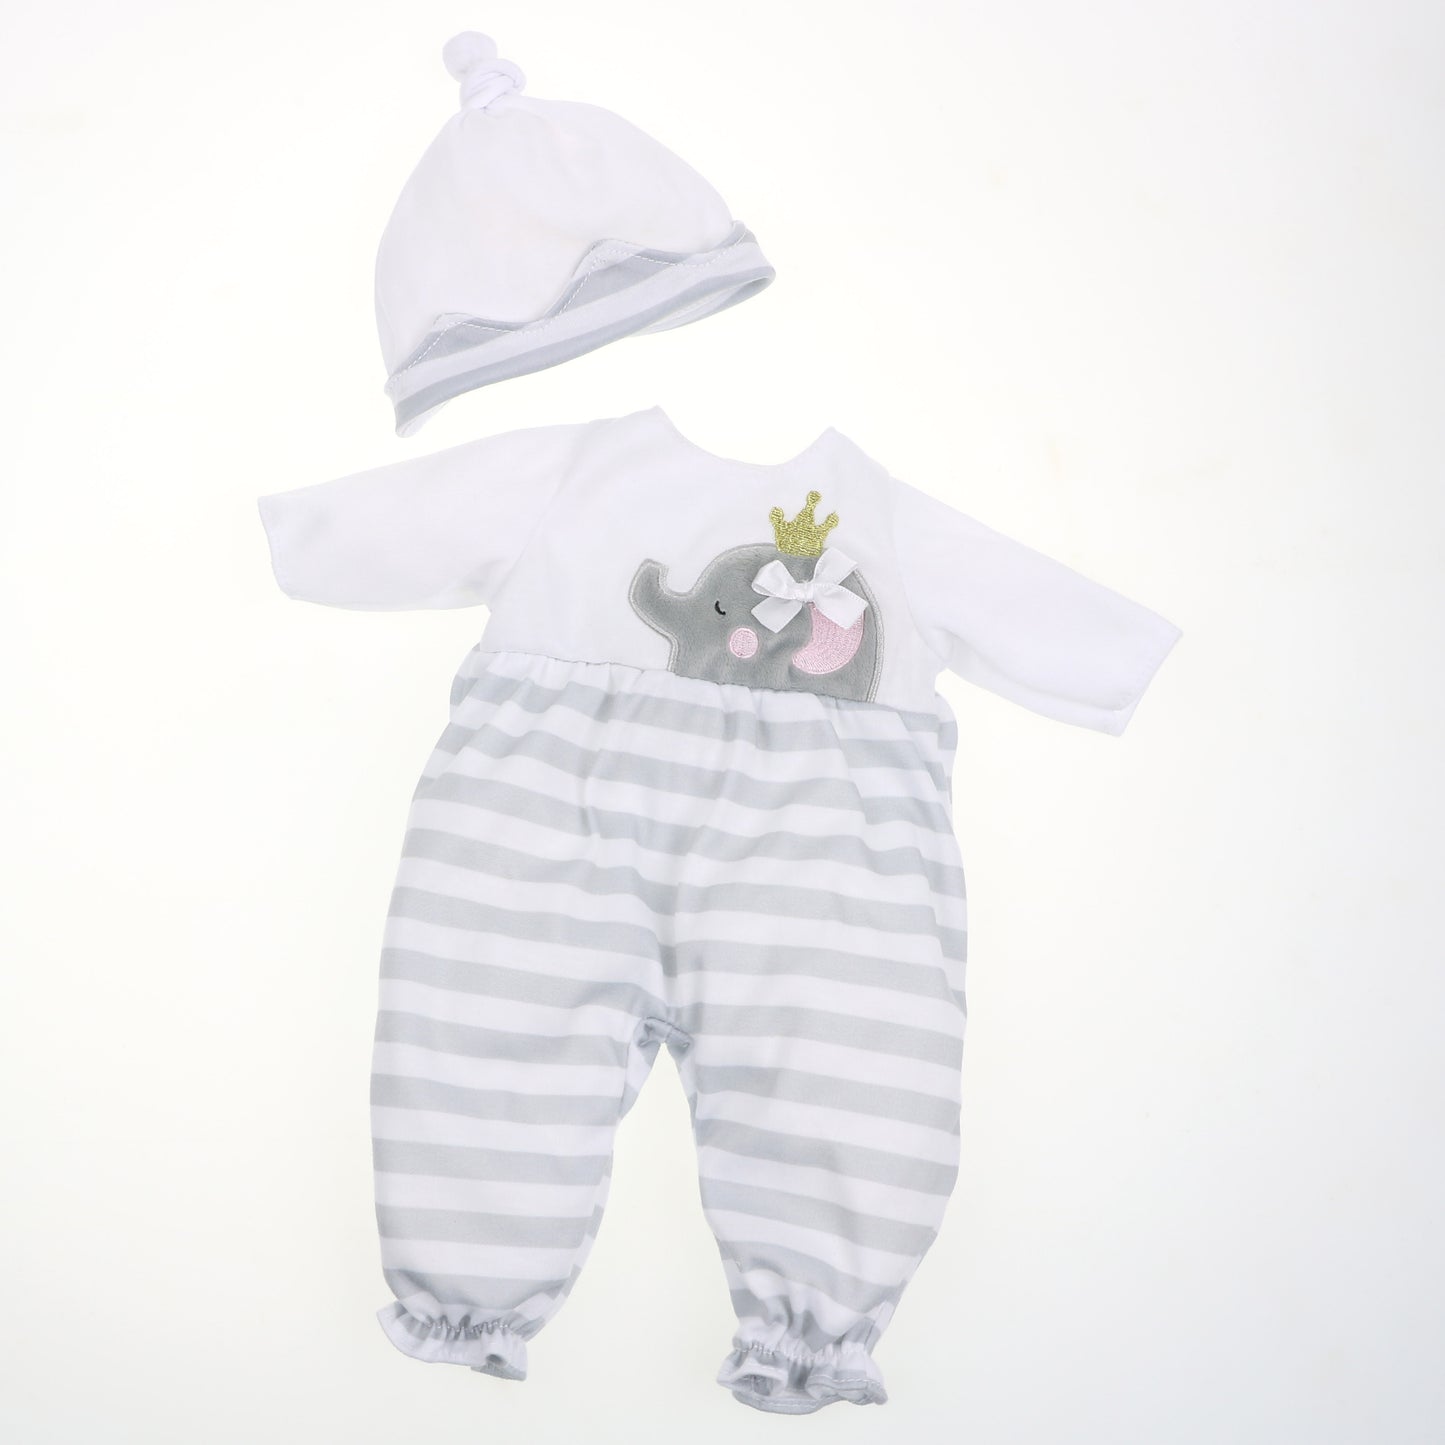 JC Toys Berenguer Boutique Baby Doll Outfit Gray Striped Long Onesie with Hat, and Booties